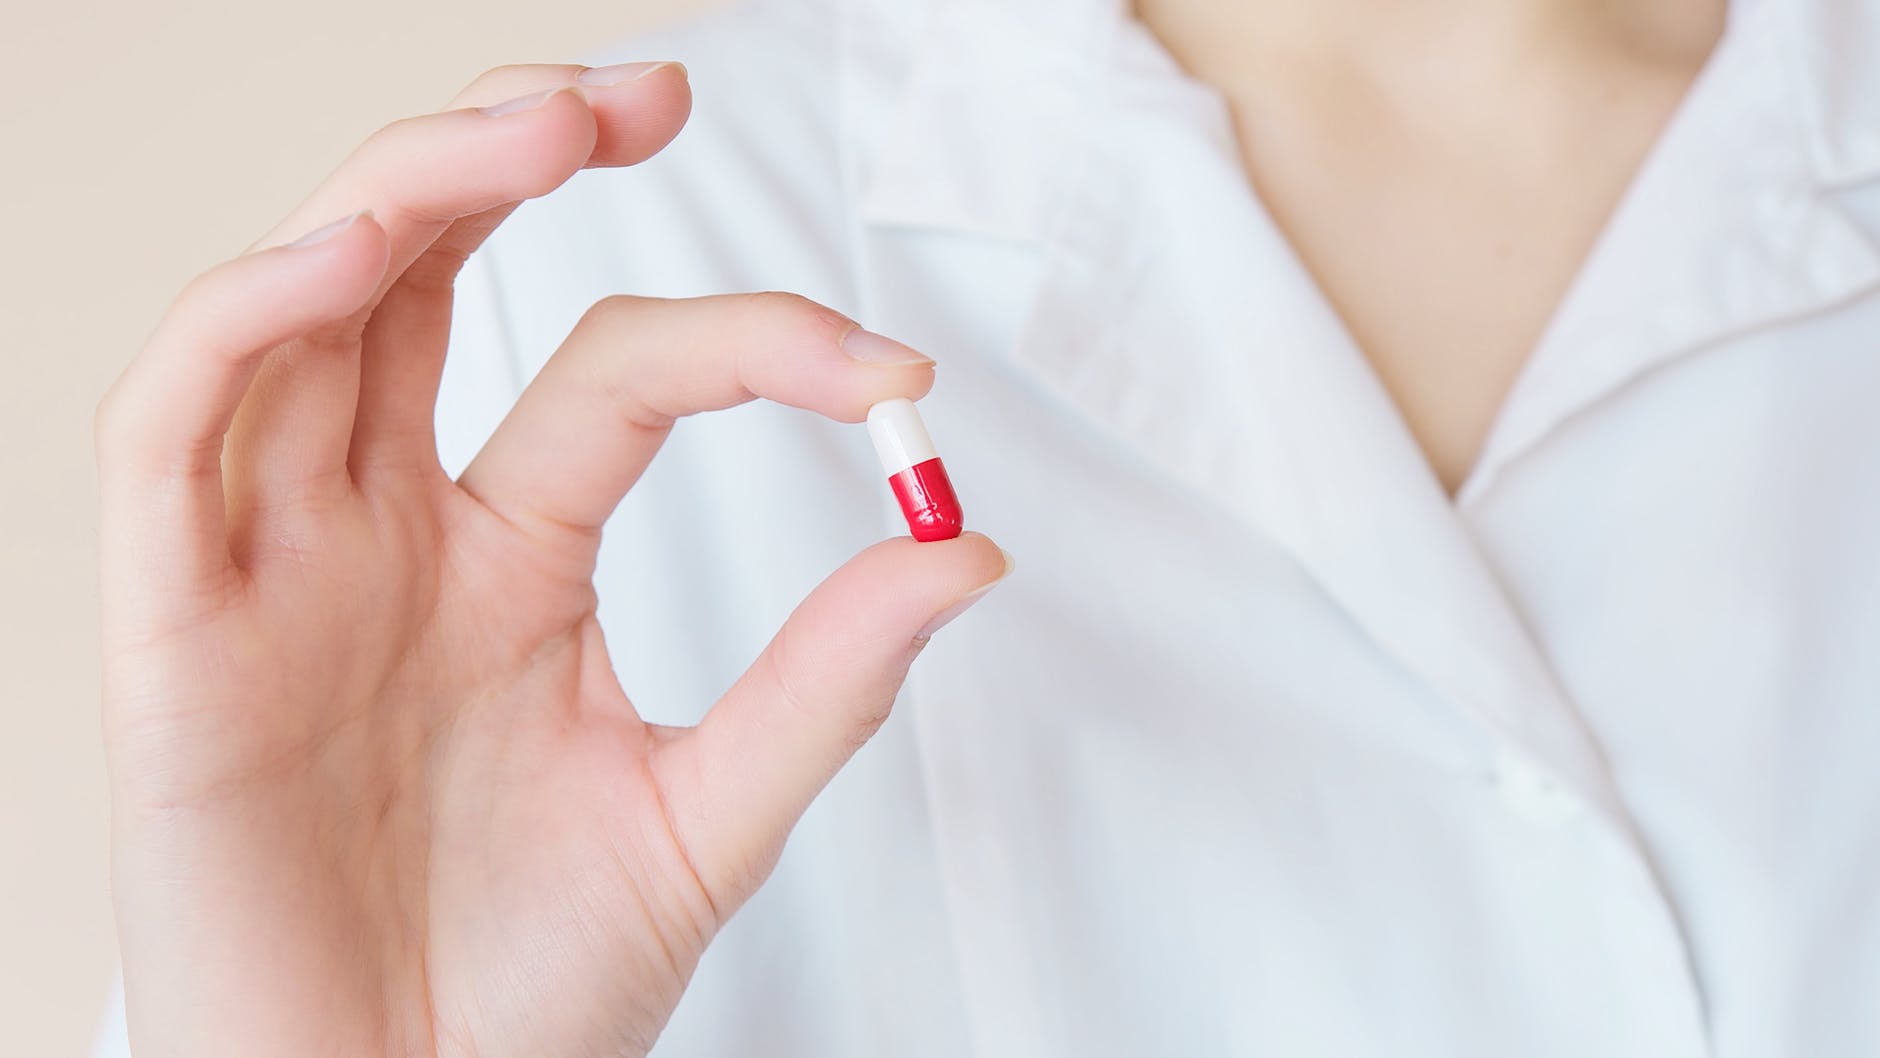 Woman in white shirt holding a red and white pill